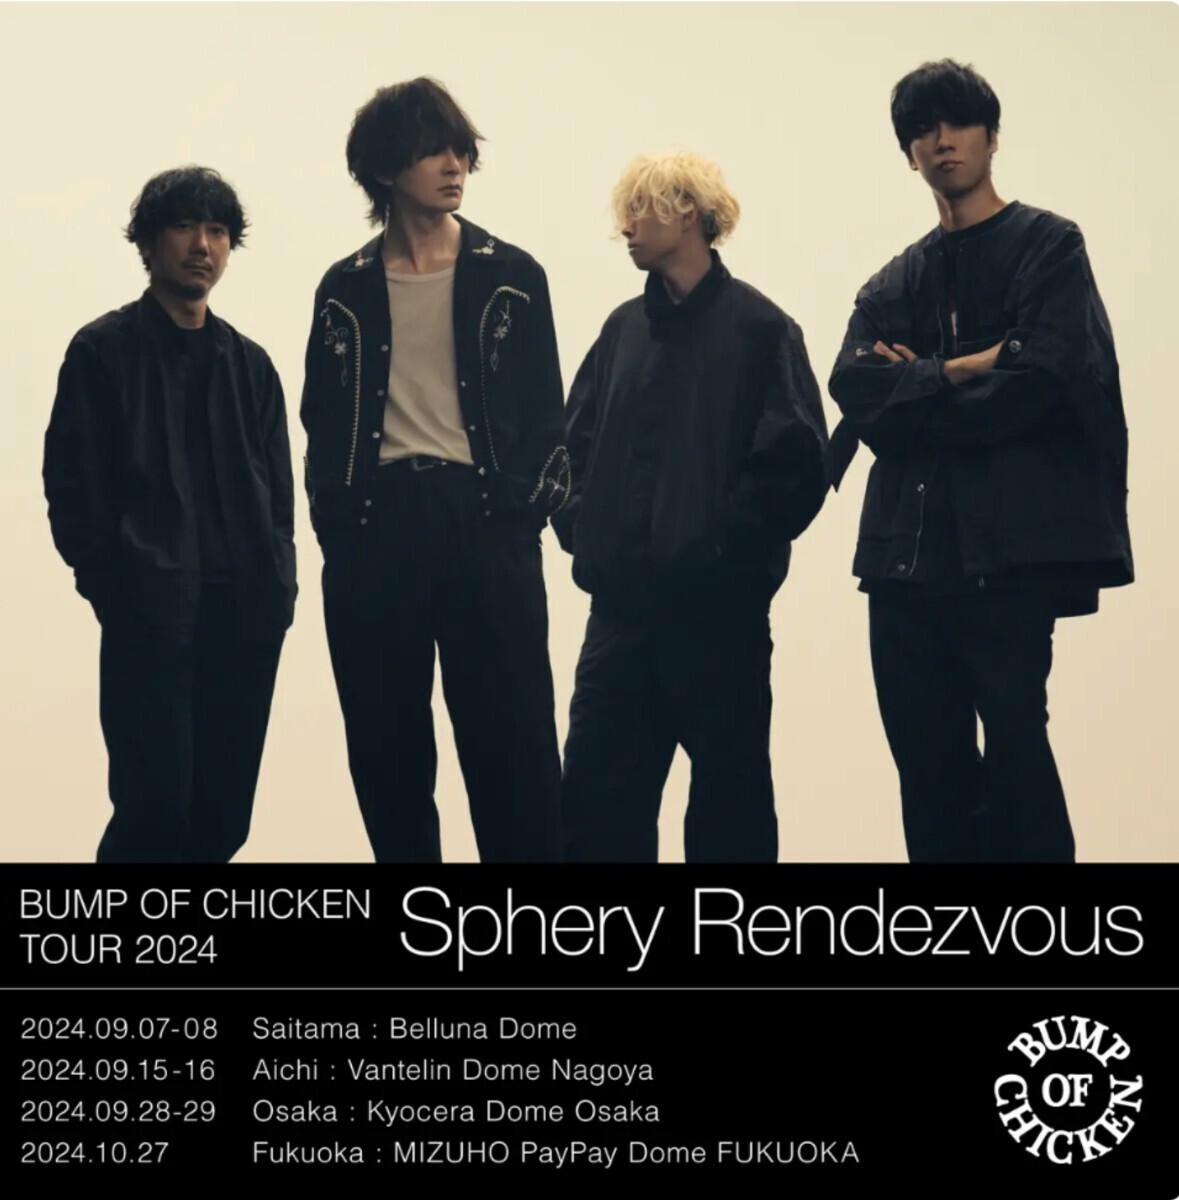 BUMP OF CHICKEN TOUR 2024 Sphery Rendezvous 最速先行抽選 応募 申し込み シリアルコード の画像1